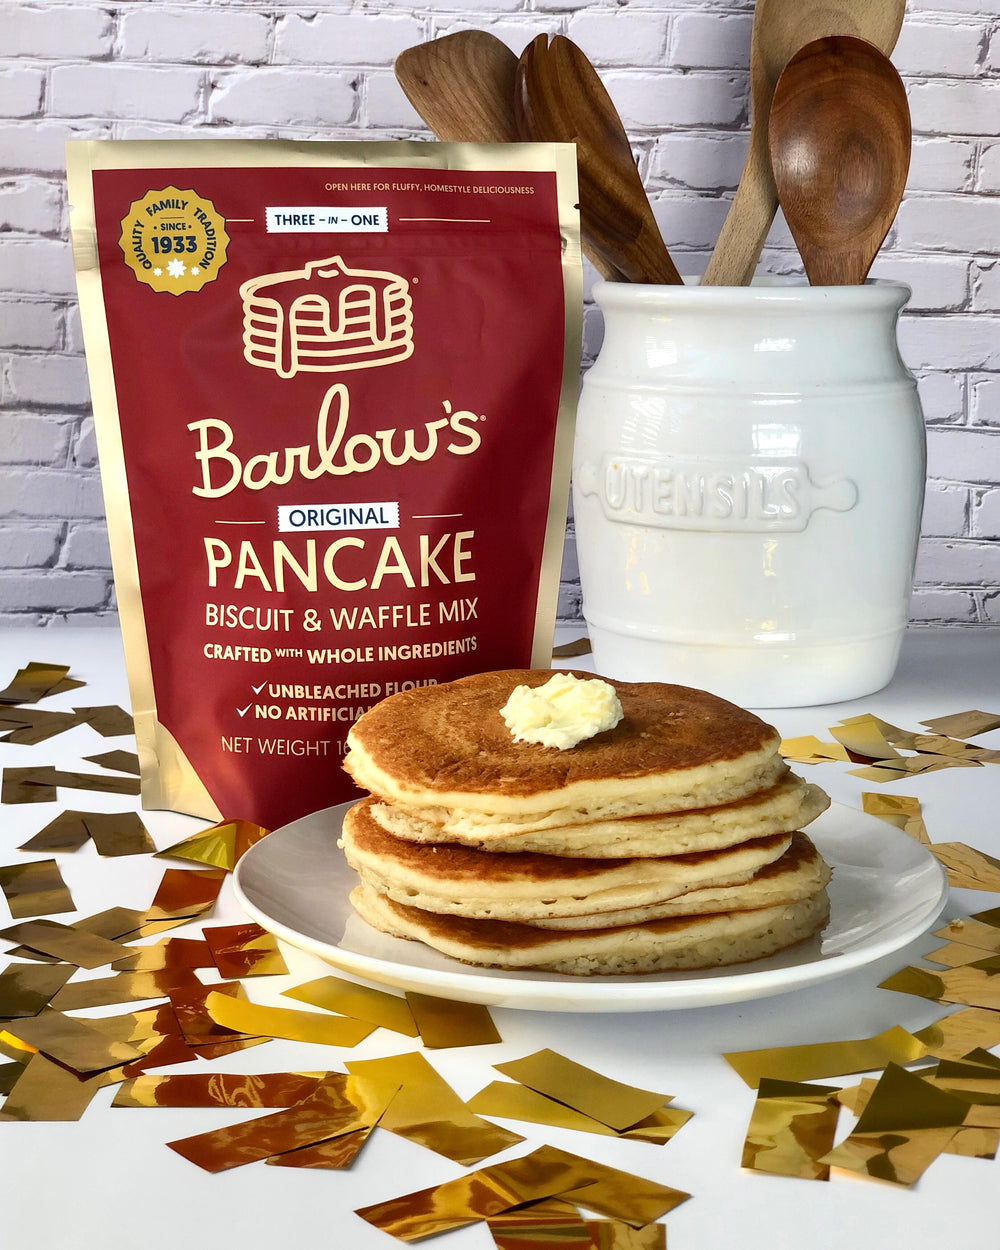 Barlow's Foods 3 in 1 Original Pancake, Biscuit and Waffle Mix - 16 oz